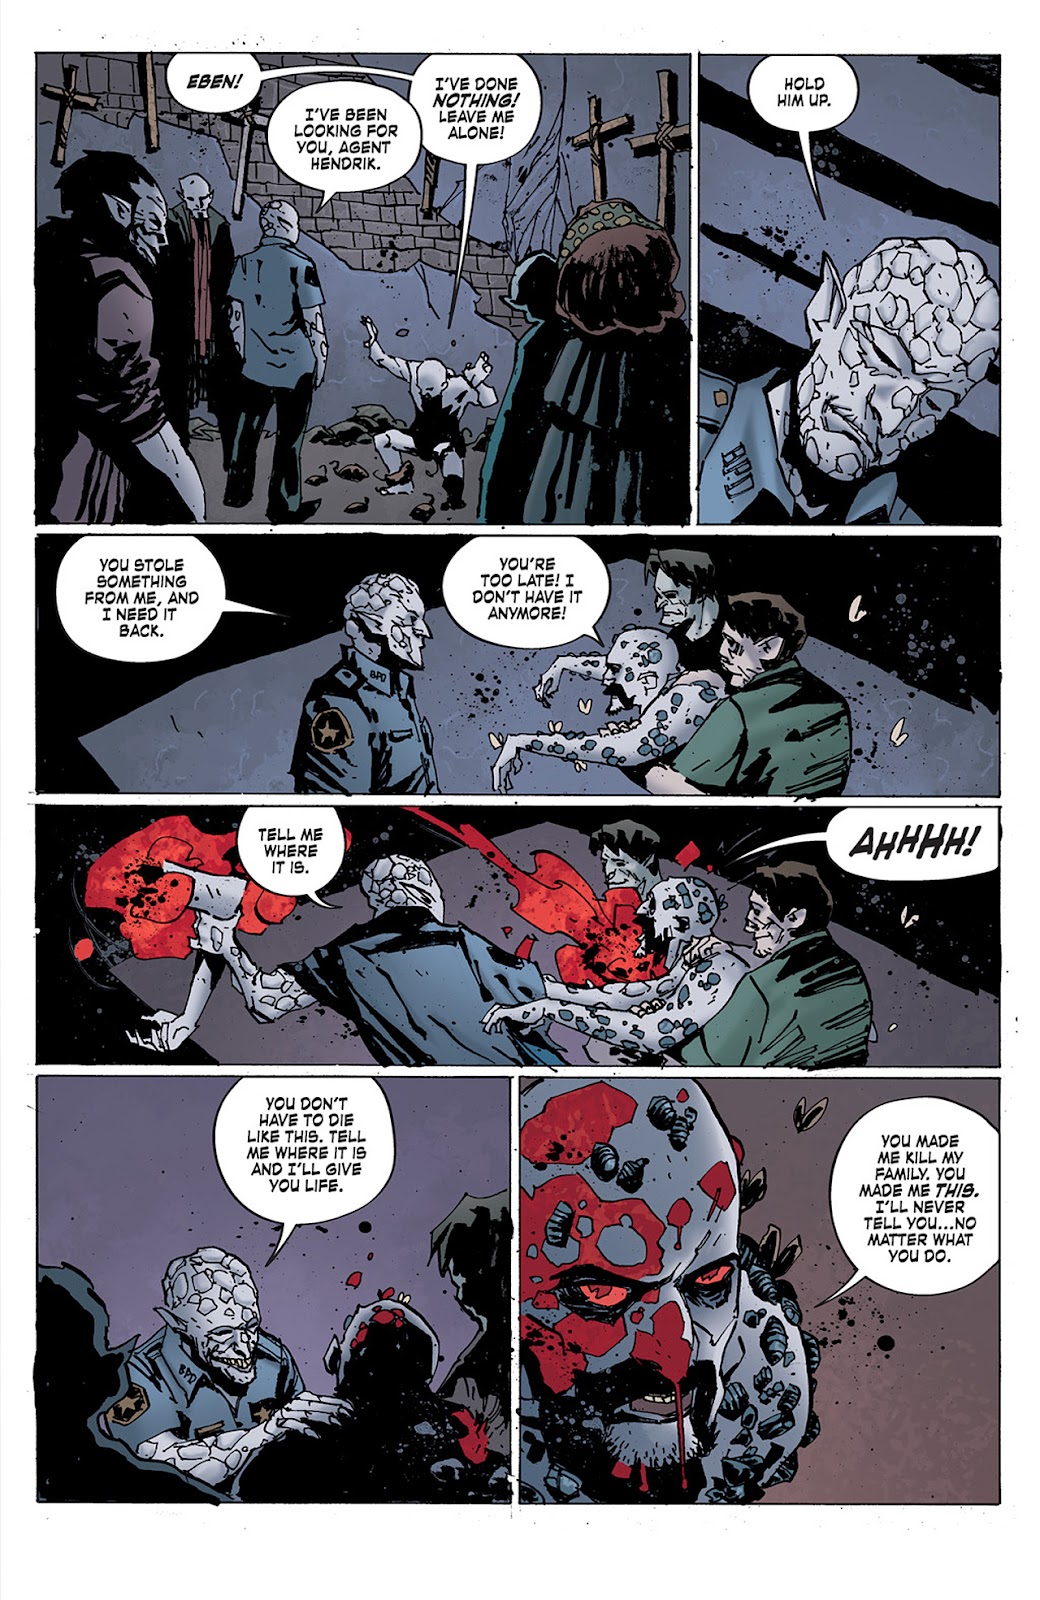 Criminal Macabre: Final Night - The 30 Days of Night Crossover issue 3 - Page 5